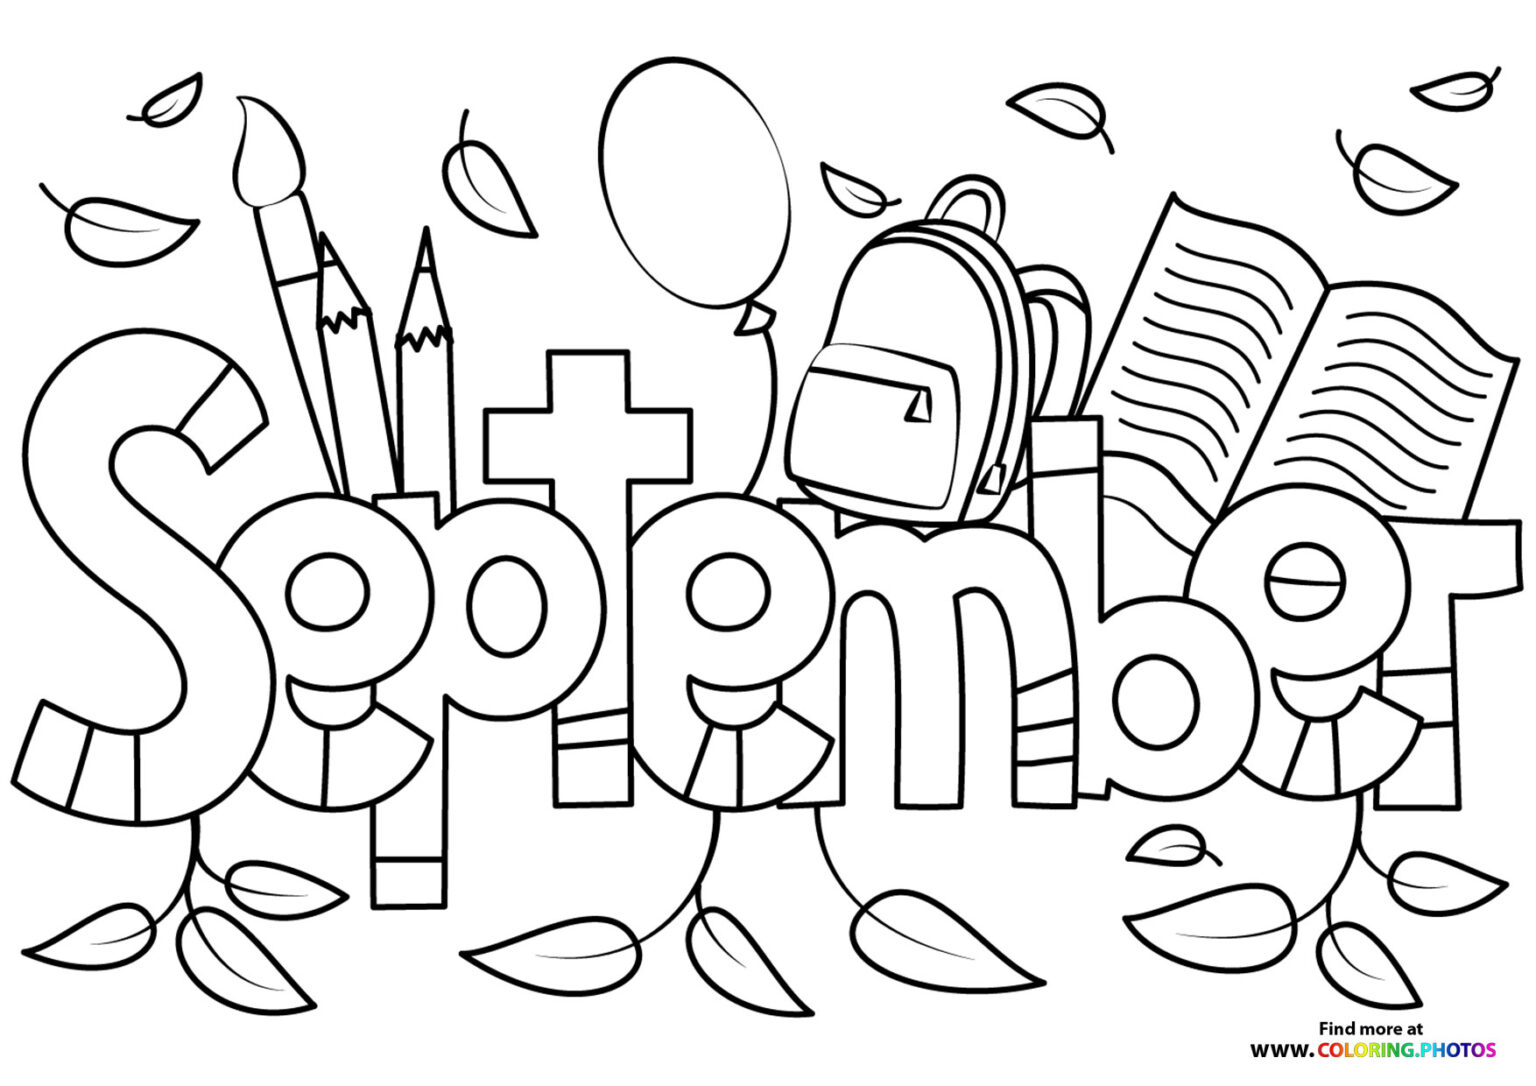 September Coloring Pages For Adults Coloring Pages